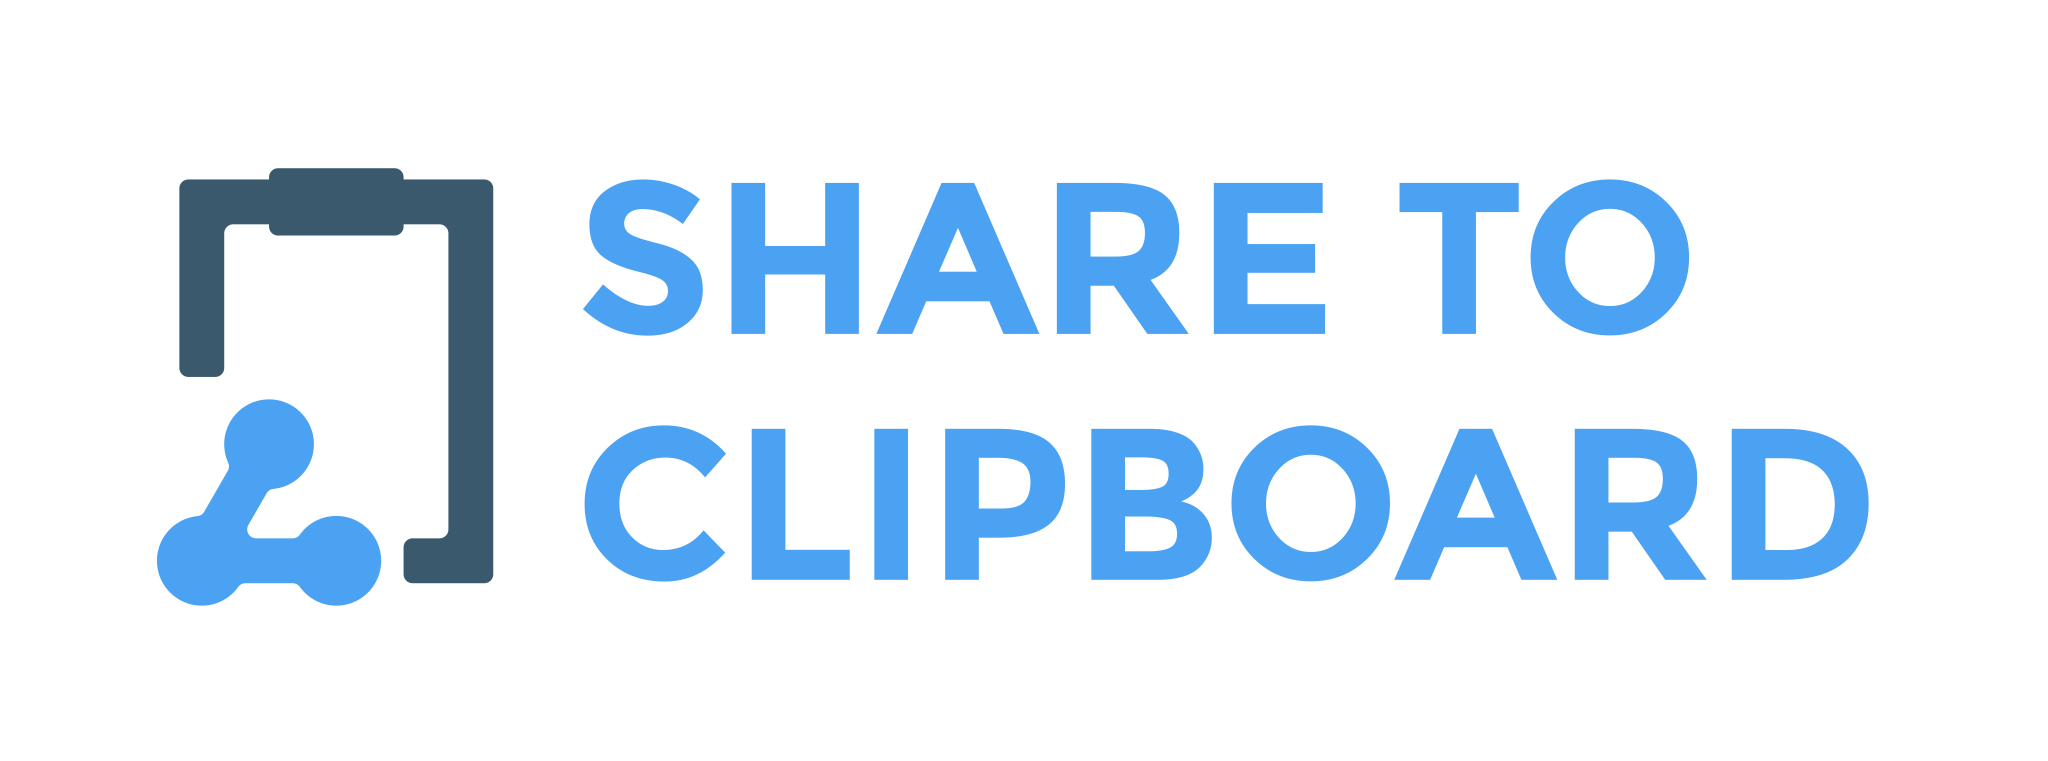 share_to_clipboard